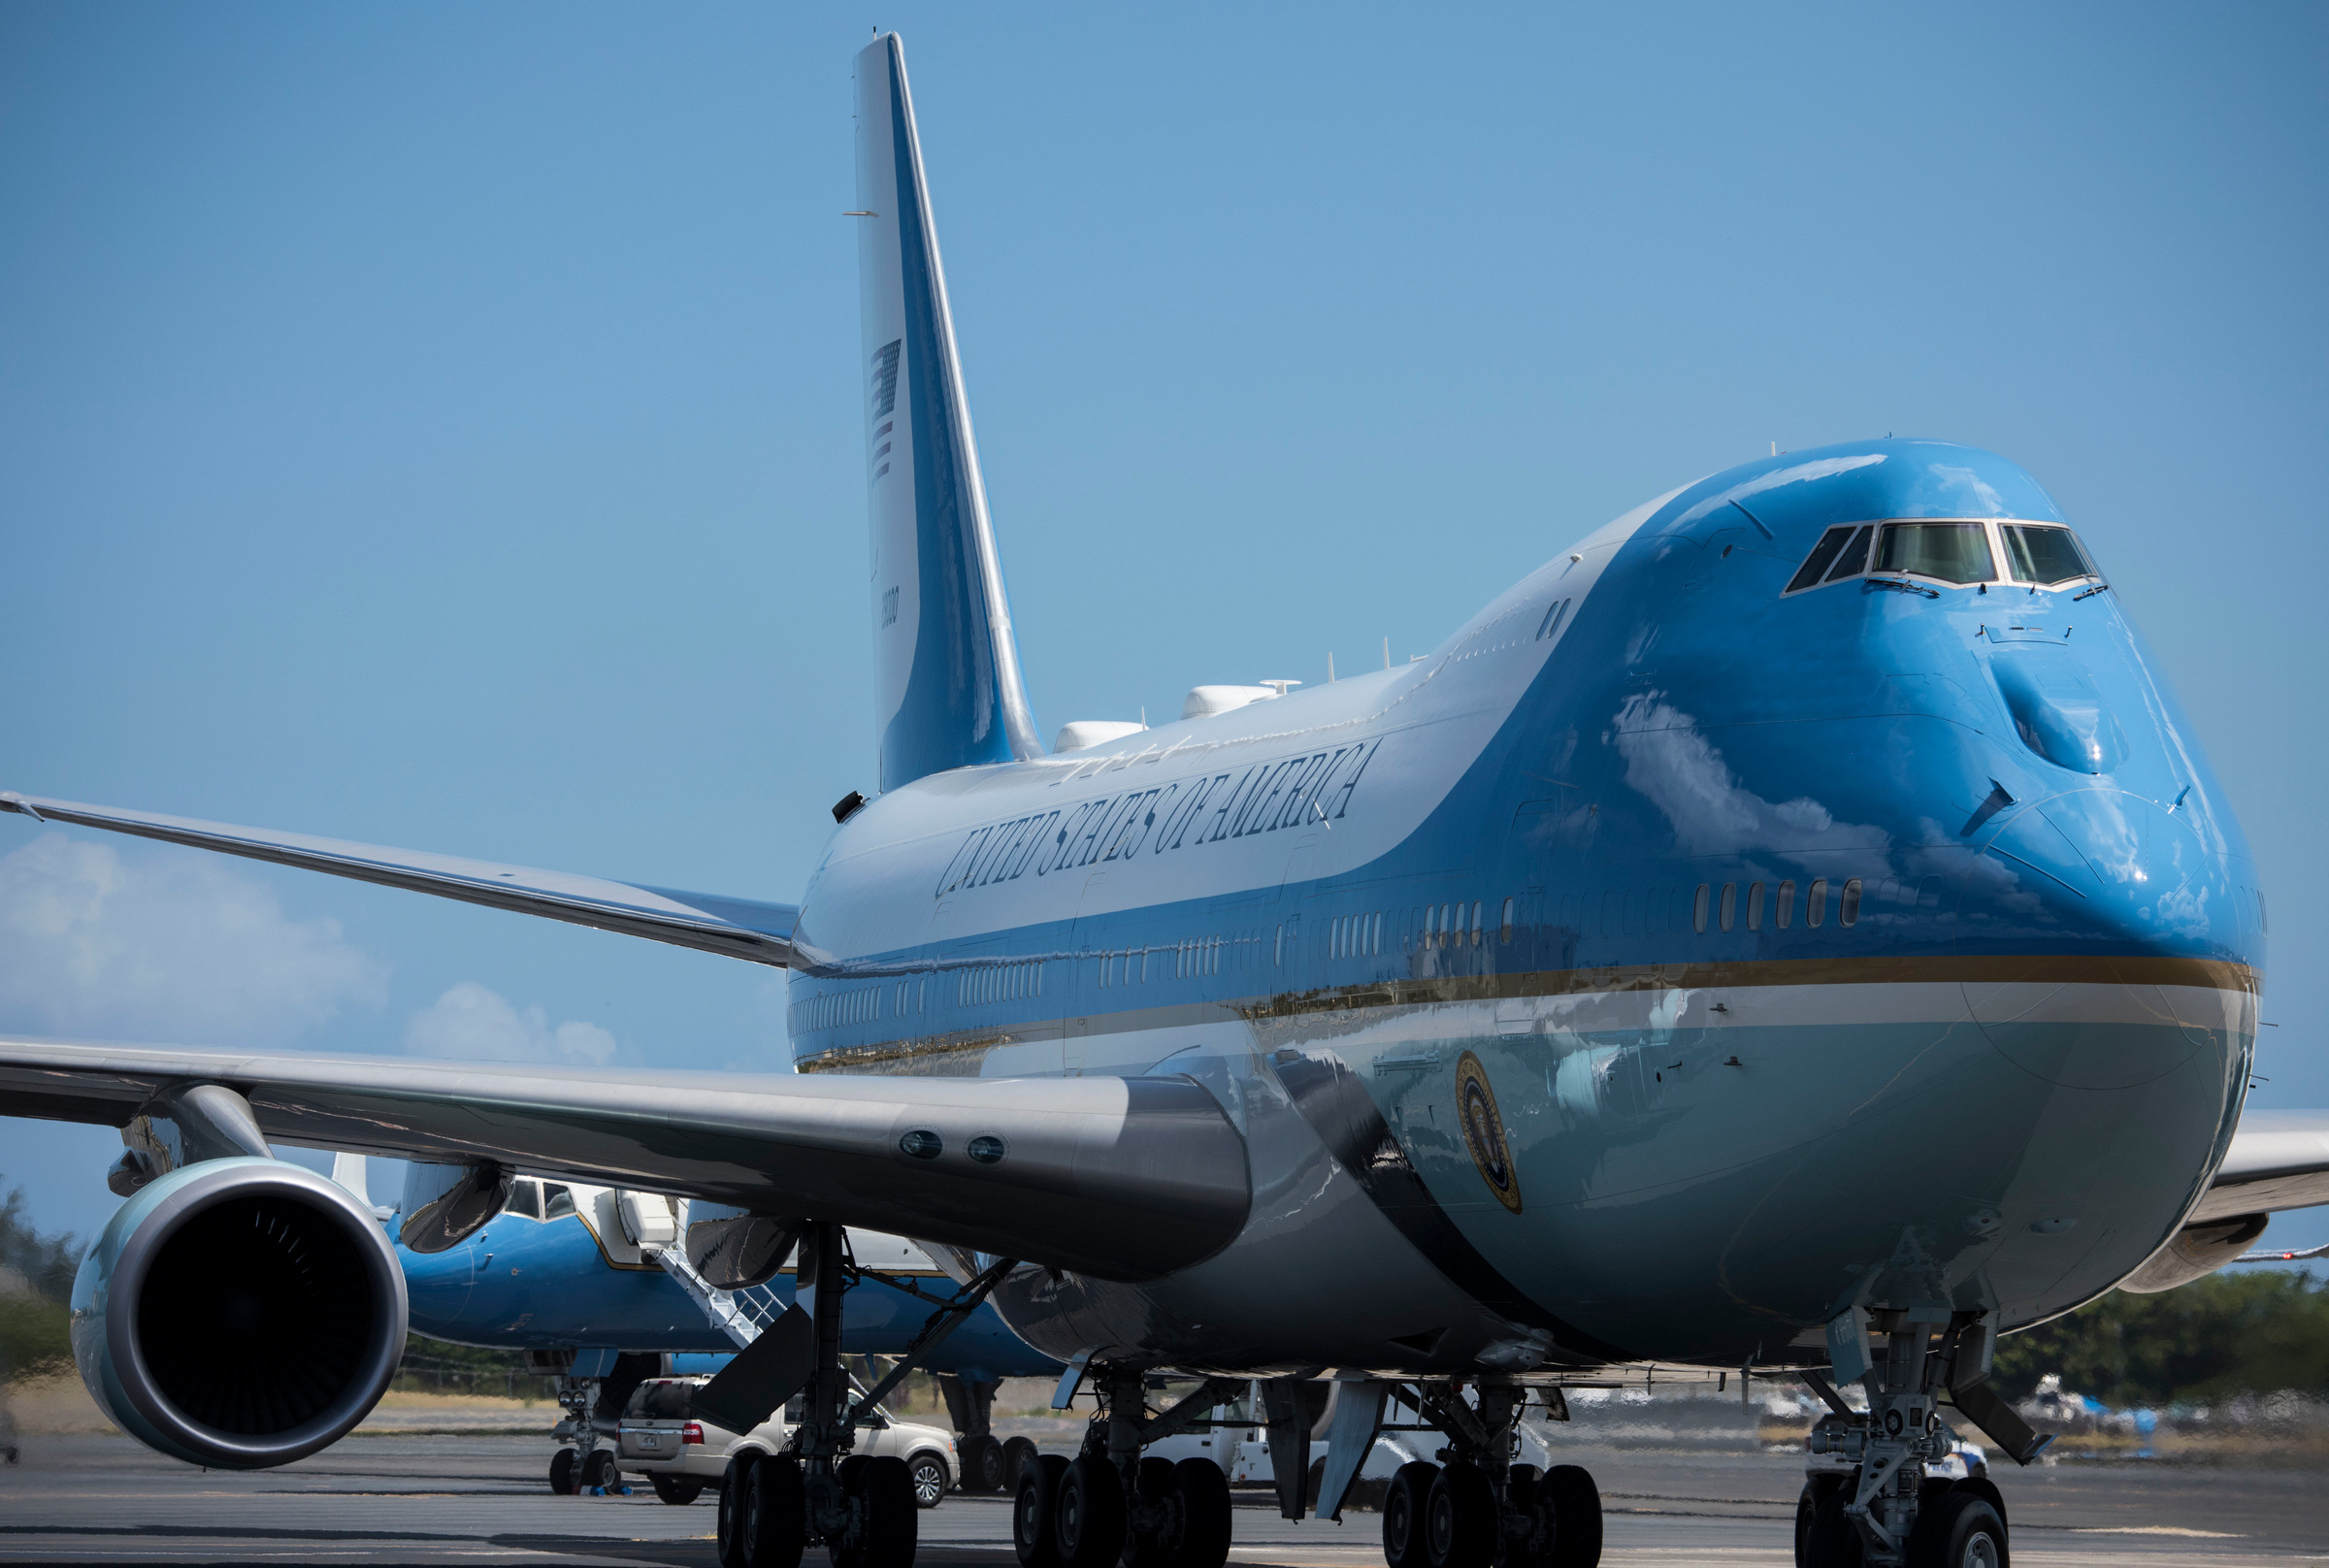 Air Force One refuels at Joint Base Pearl Harbor-Hickam, Hawaii, on President Donald Trump's return to Washington D.C. from the North Korea summit, June 12, 2018. (U.S. Air Force photo by Senior Airman Brittany A. Chase)